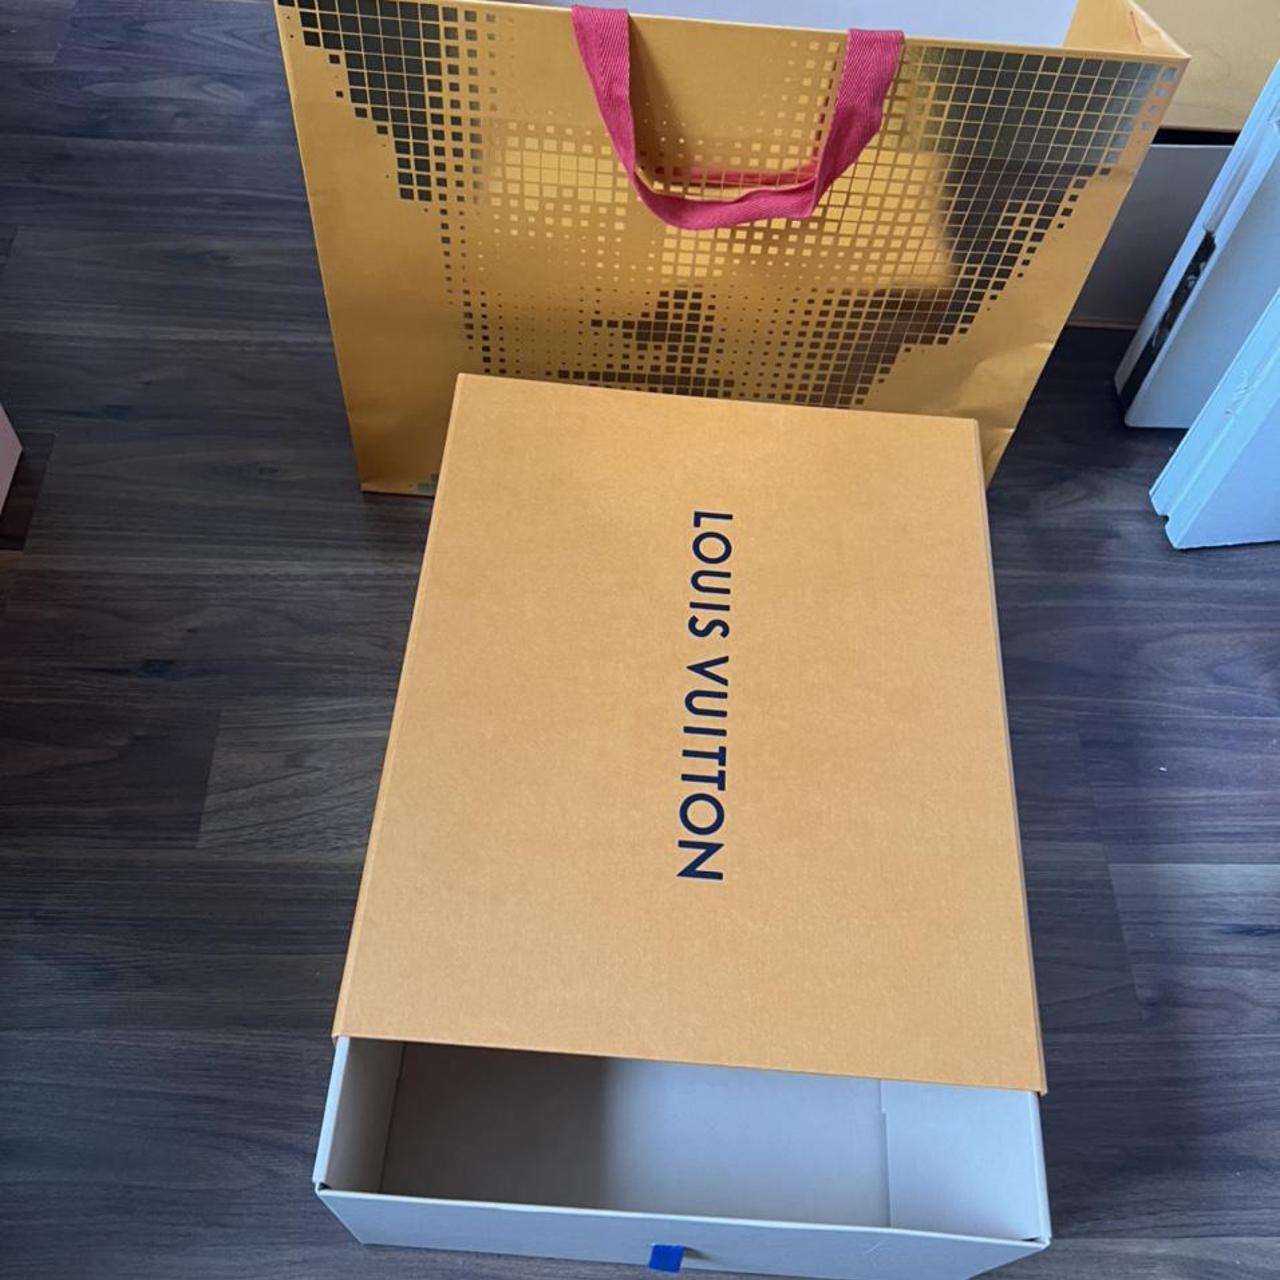 Louis vuitton gift big box 28x35.5x14 cm with the